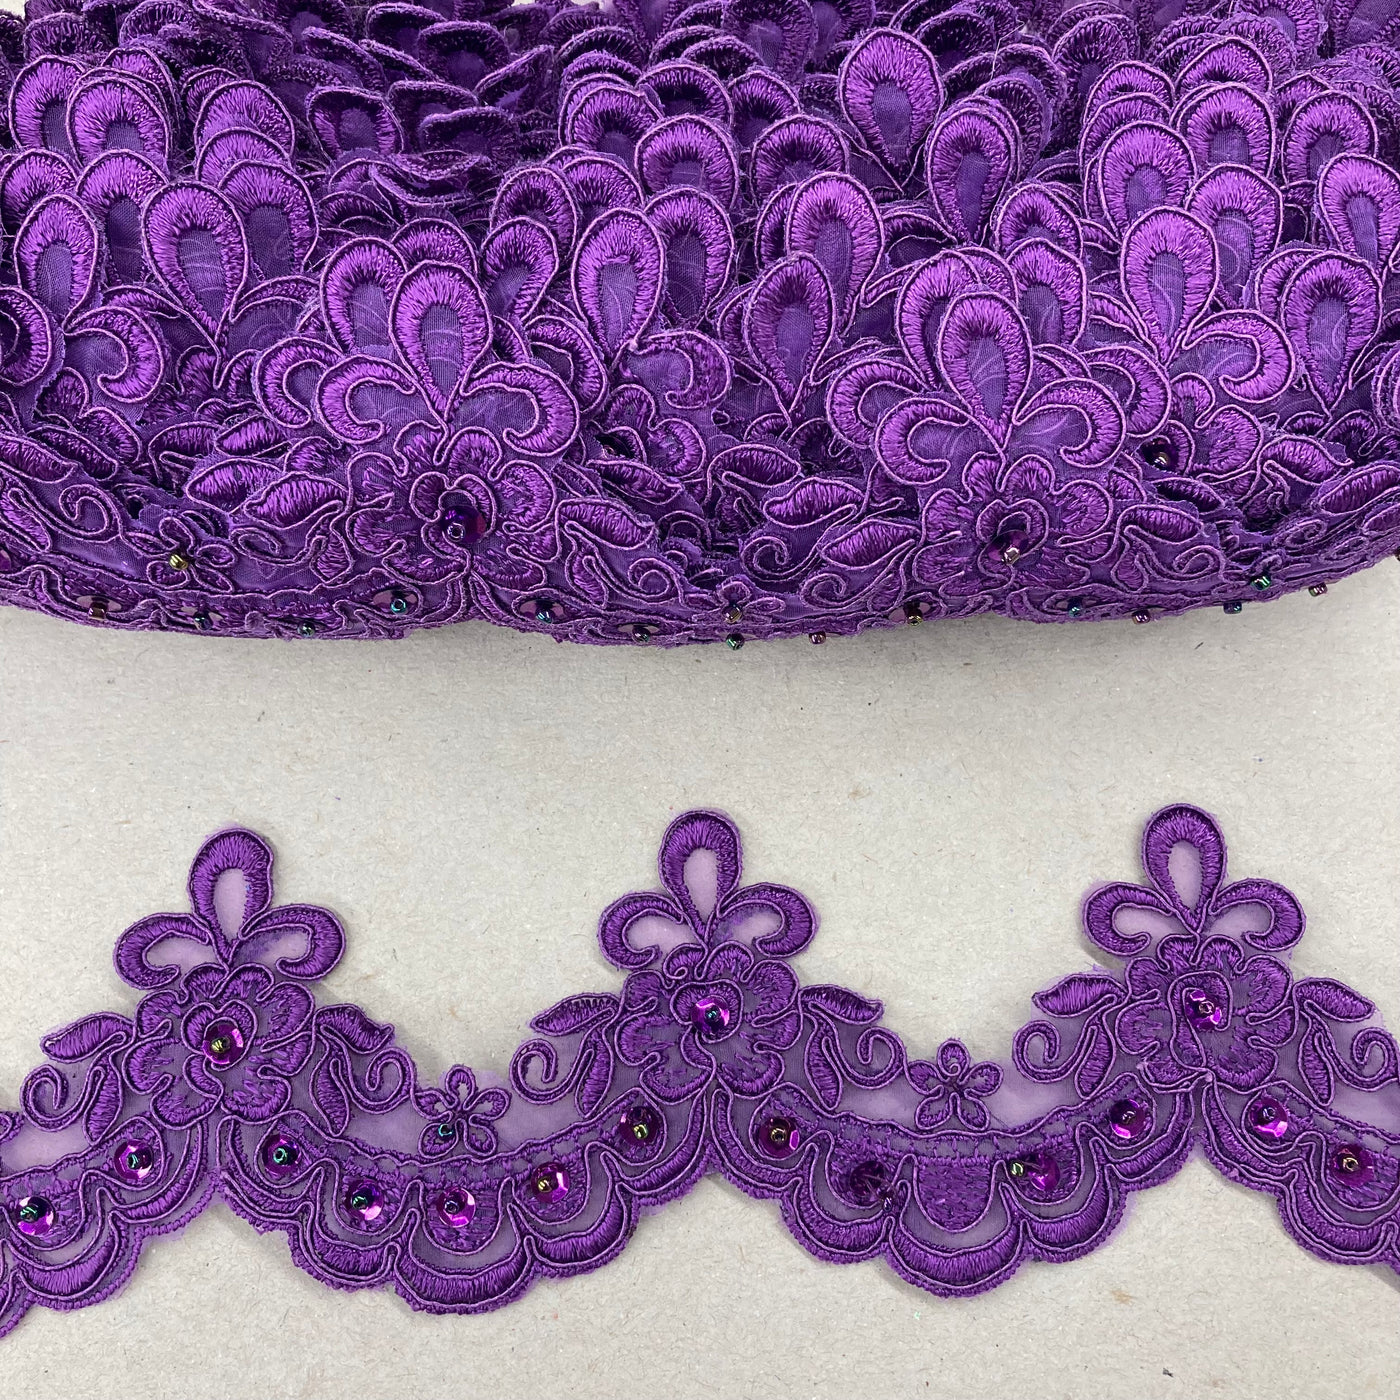 Beaded Lace Trimming Embroidered on 100% Polyester Organza. Lace USA